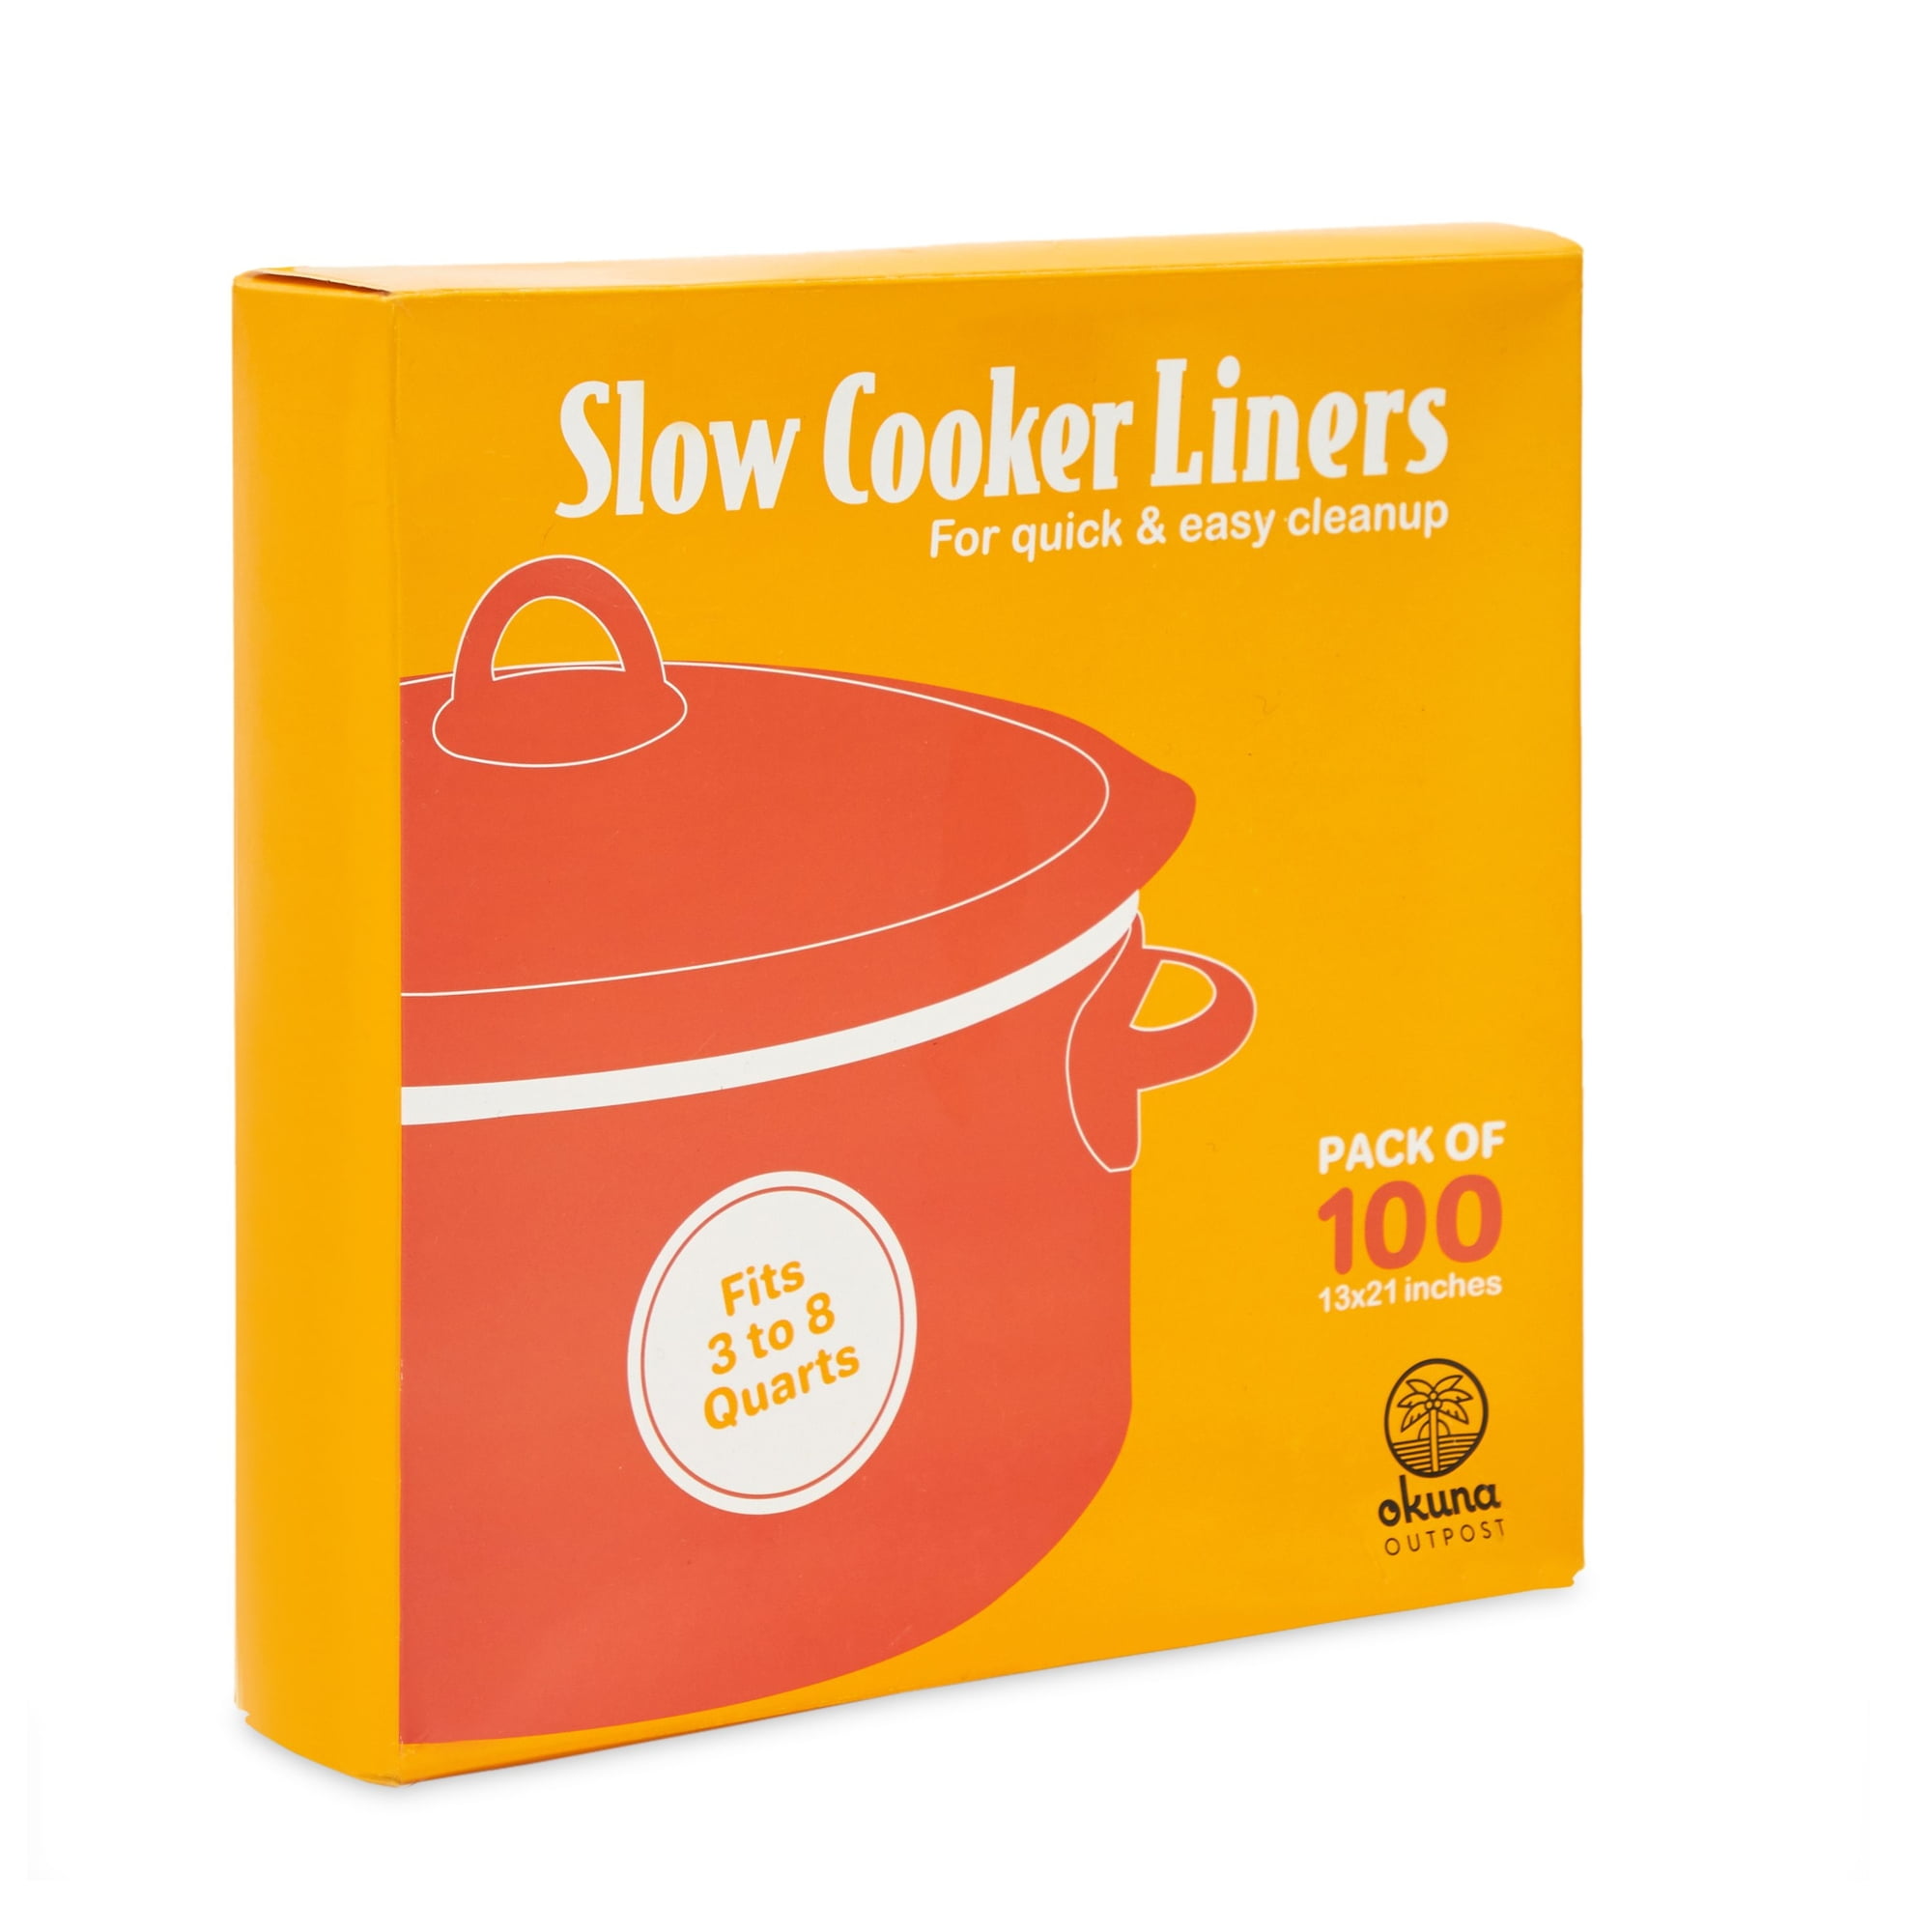 OOFLAYE 20 Counts Slow Cooker Liners and Cooking Bags, Extra Large Size Fits 6-10QT Pot, 14x 22, BPA Free, Suitable for Oval & Roun